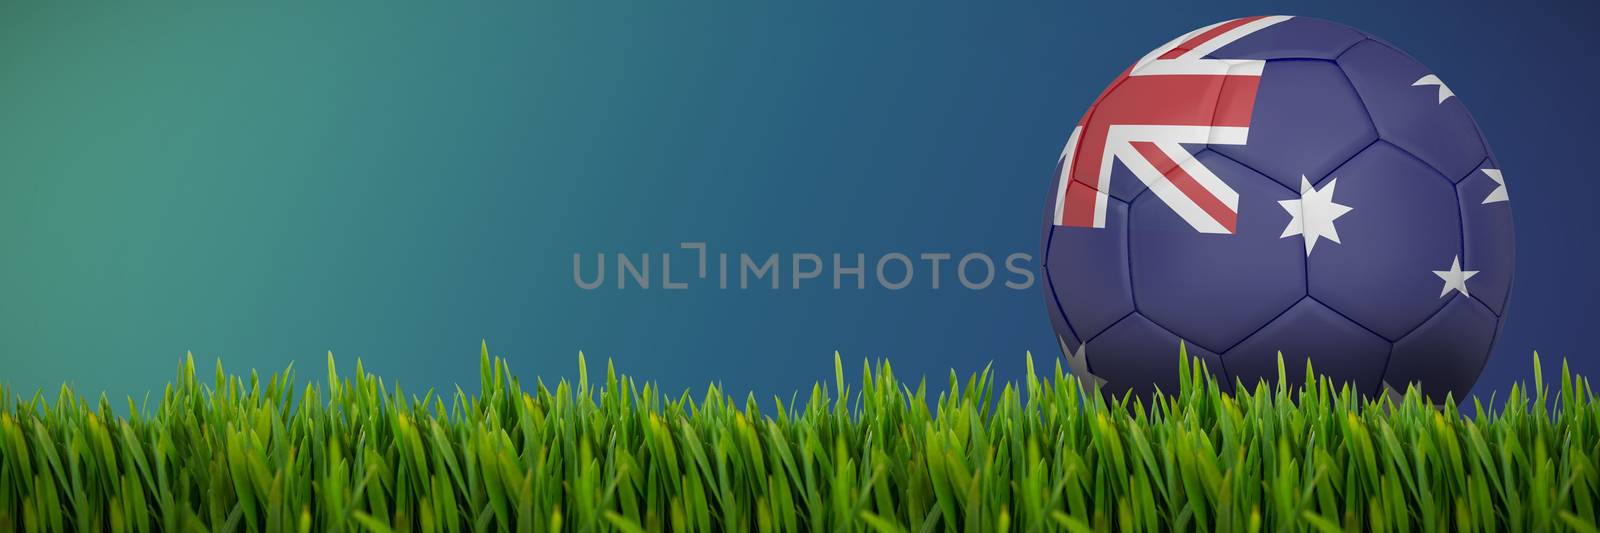 Grass growing outdoors against abstract multicolored background